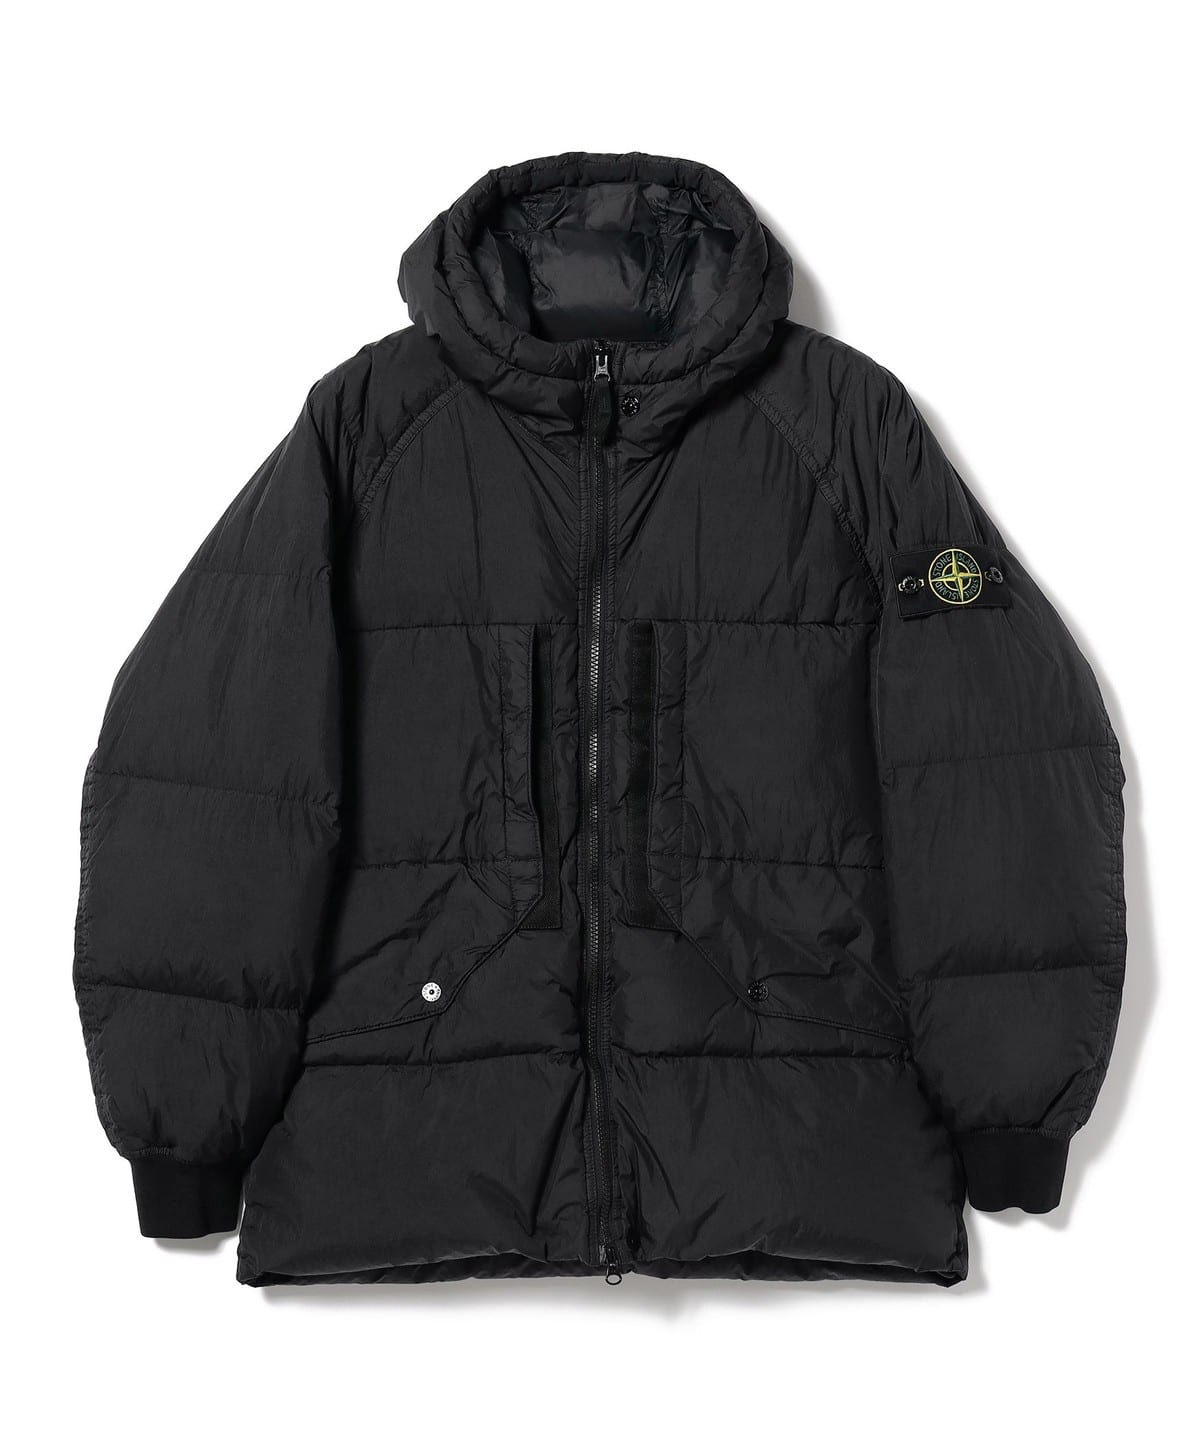 BEAMS（ビームス）STONE ISLAND / Garment Dyed Crinkle Reps Recycled